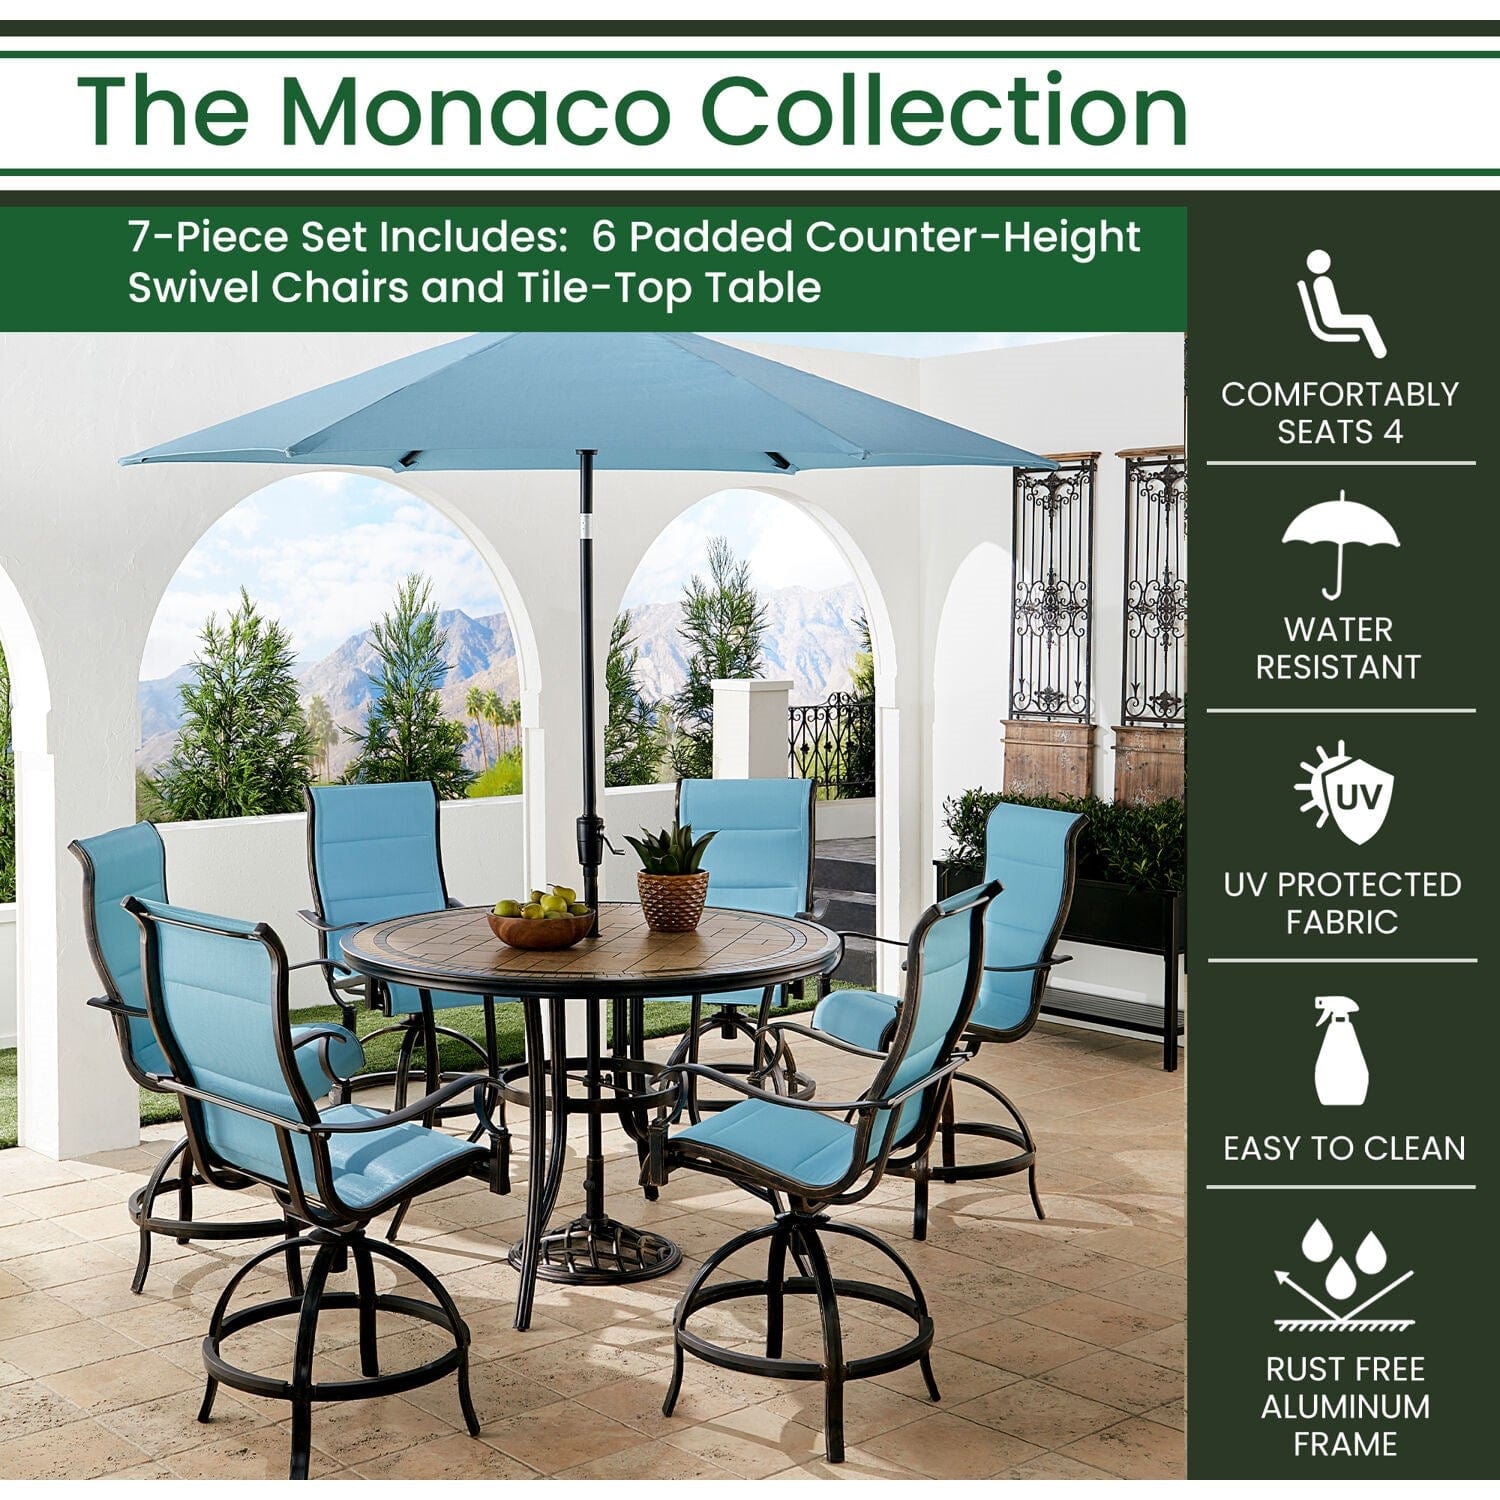 Hanover Outdoor Dining Set Hanover Monaco 7-Piece High-Dining Set in Blue with 6 Padded Counter-Height Swivel Chairs, 56-In. Tile-Top Table and 9-Ft. Umbrella | MONDN7PCPDBRC-SU-B